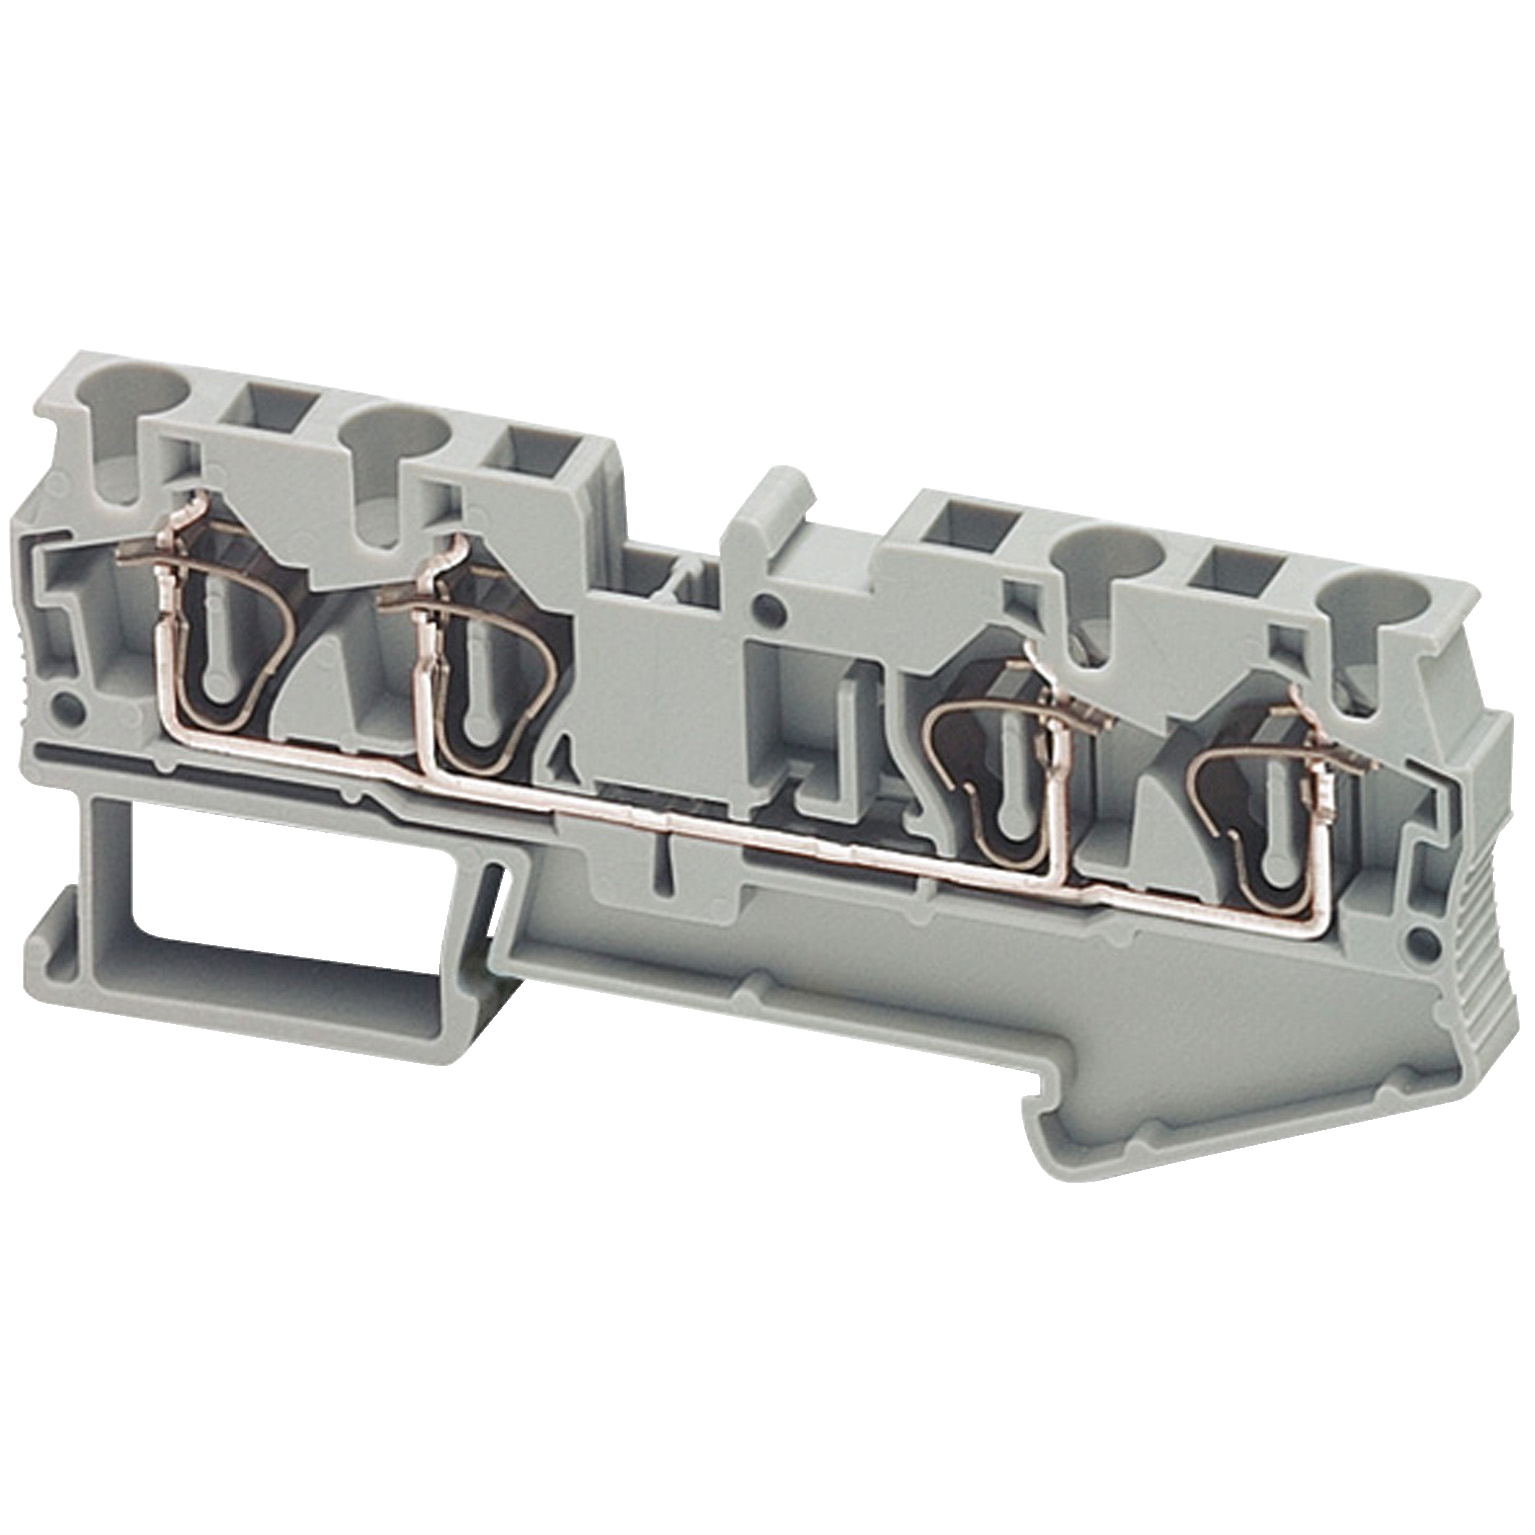 Terminal block, Linergy TR, spring type, feed through, 4 points, 4mm², grey, set of 50